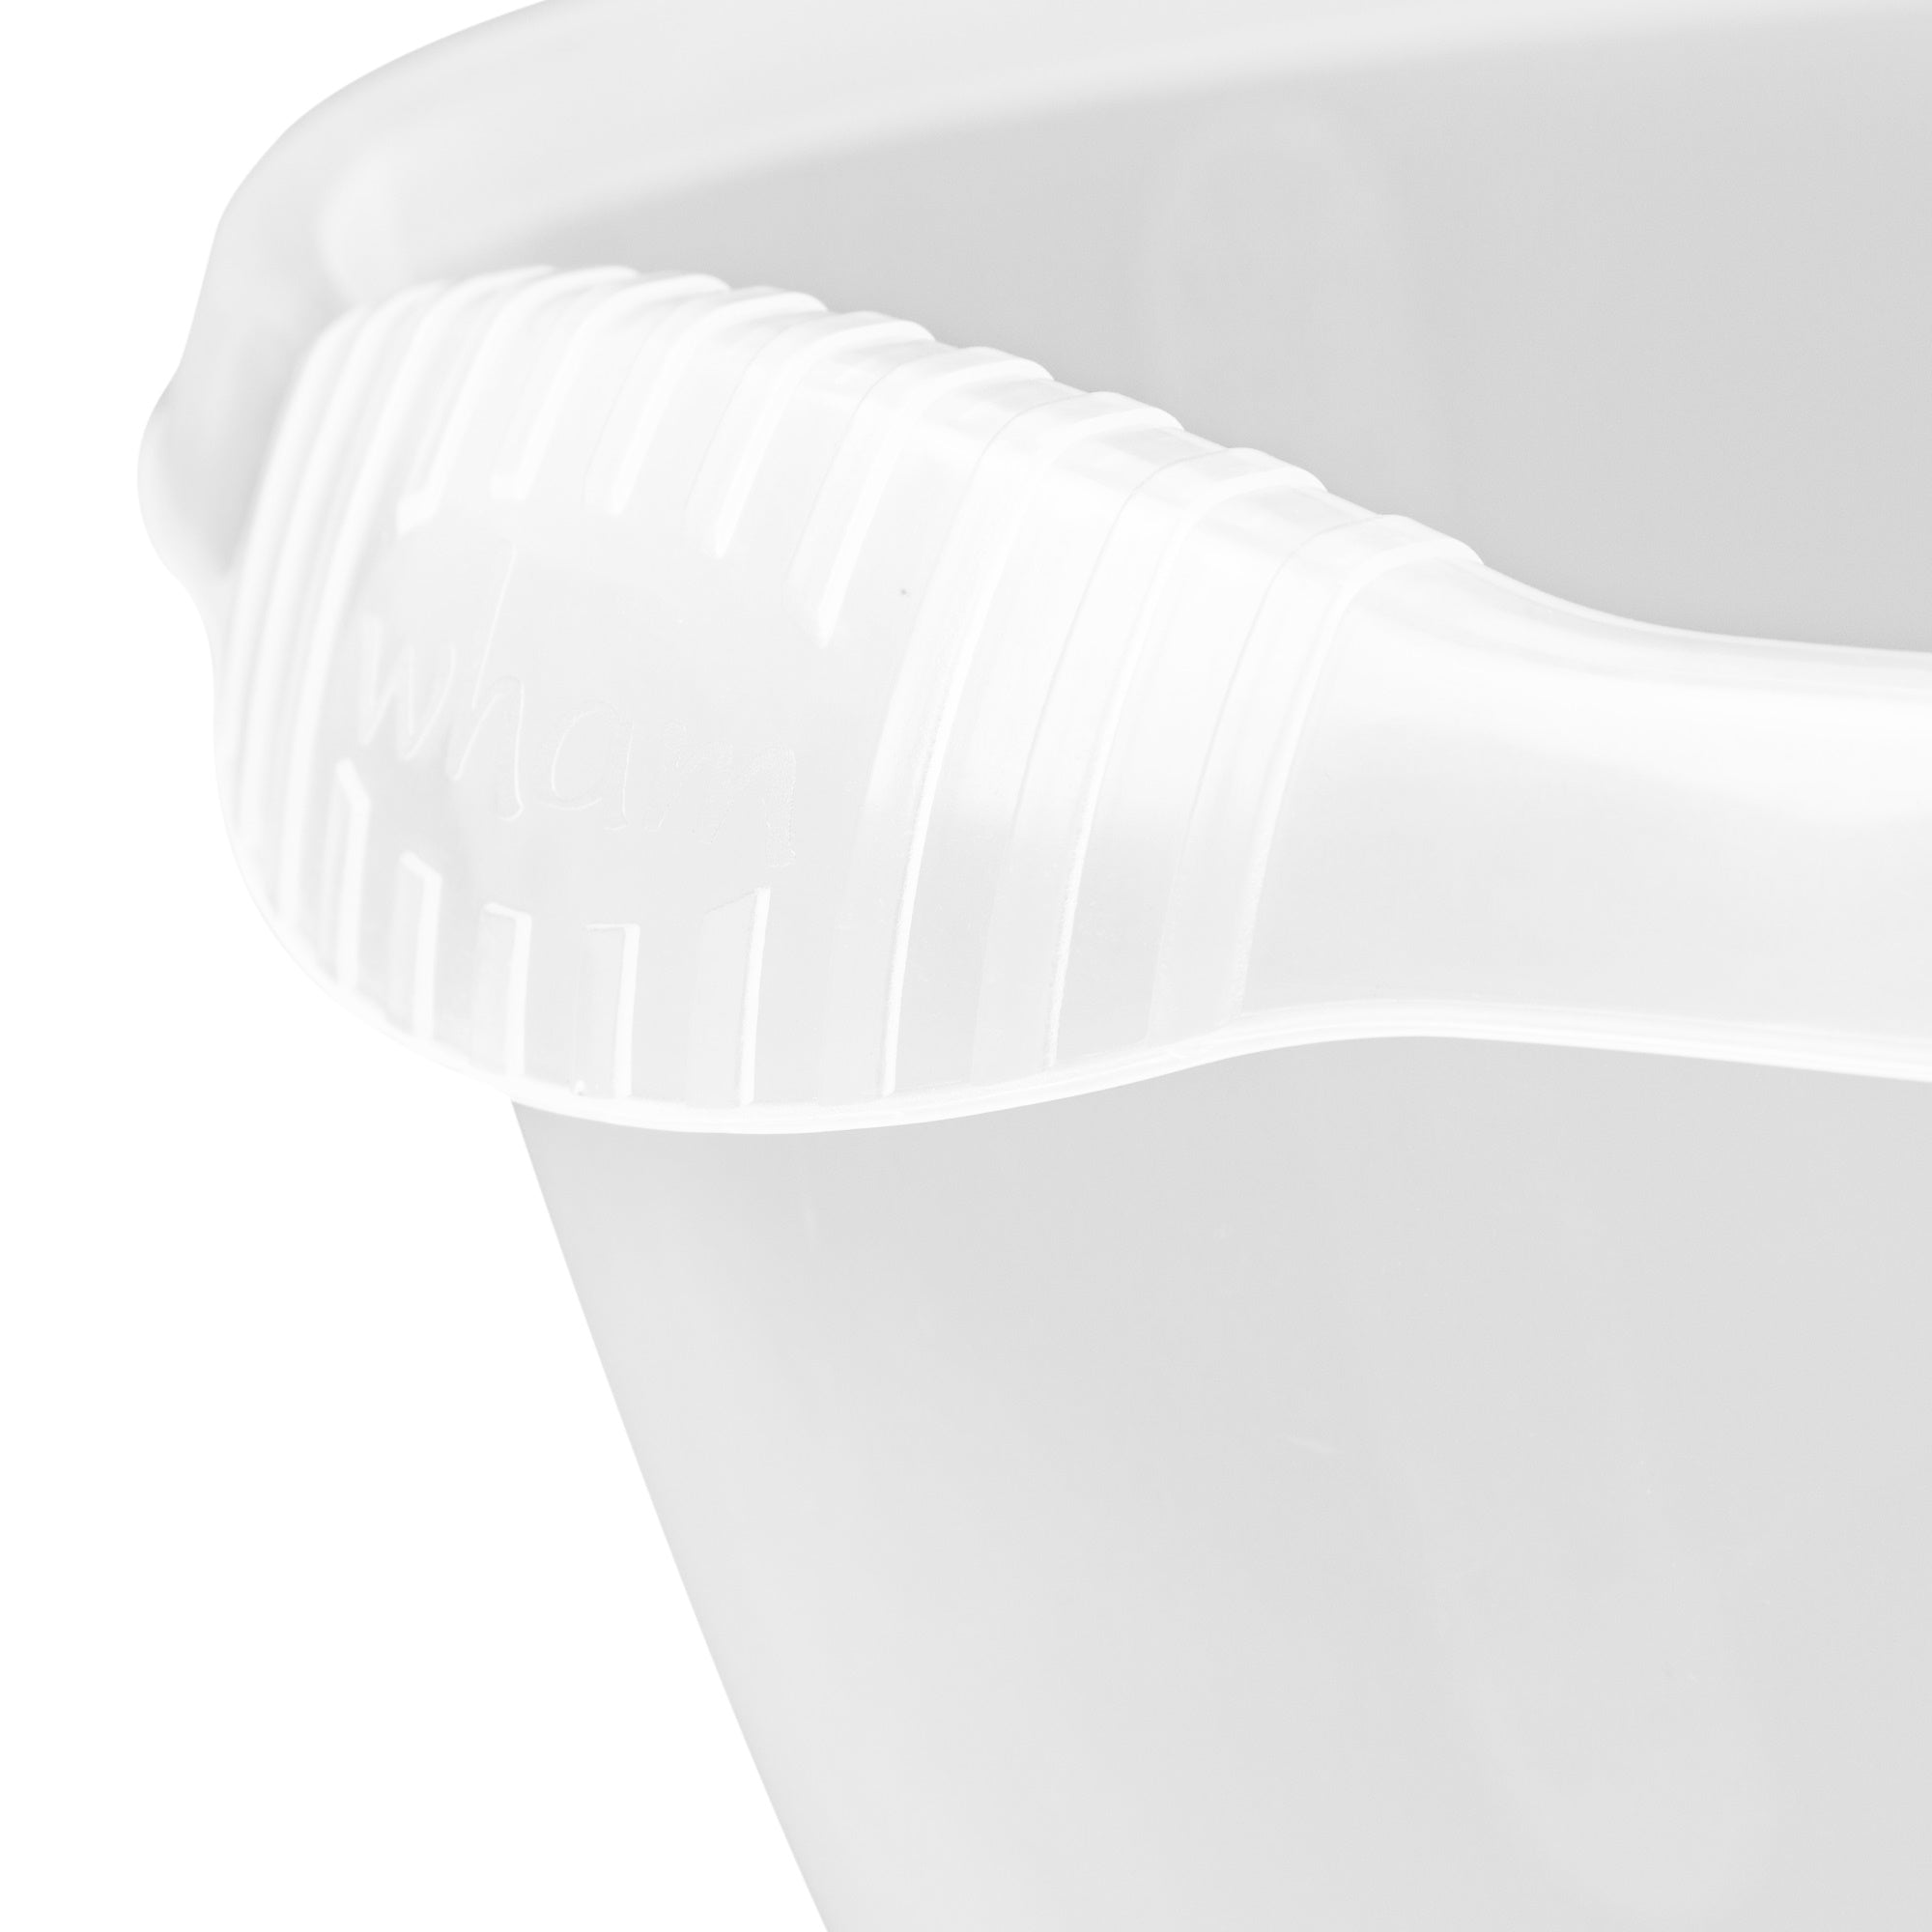 Wham 12181 Cuisine Plastic Mixing Bowl 4Ltr - Clear - Premium Mixing Bowls from What More UK Ltd - Just $2.20! Shop now at W Hurst & Son (IW) Ltd